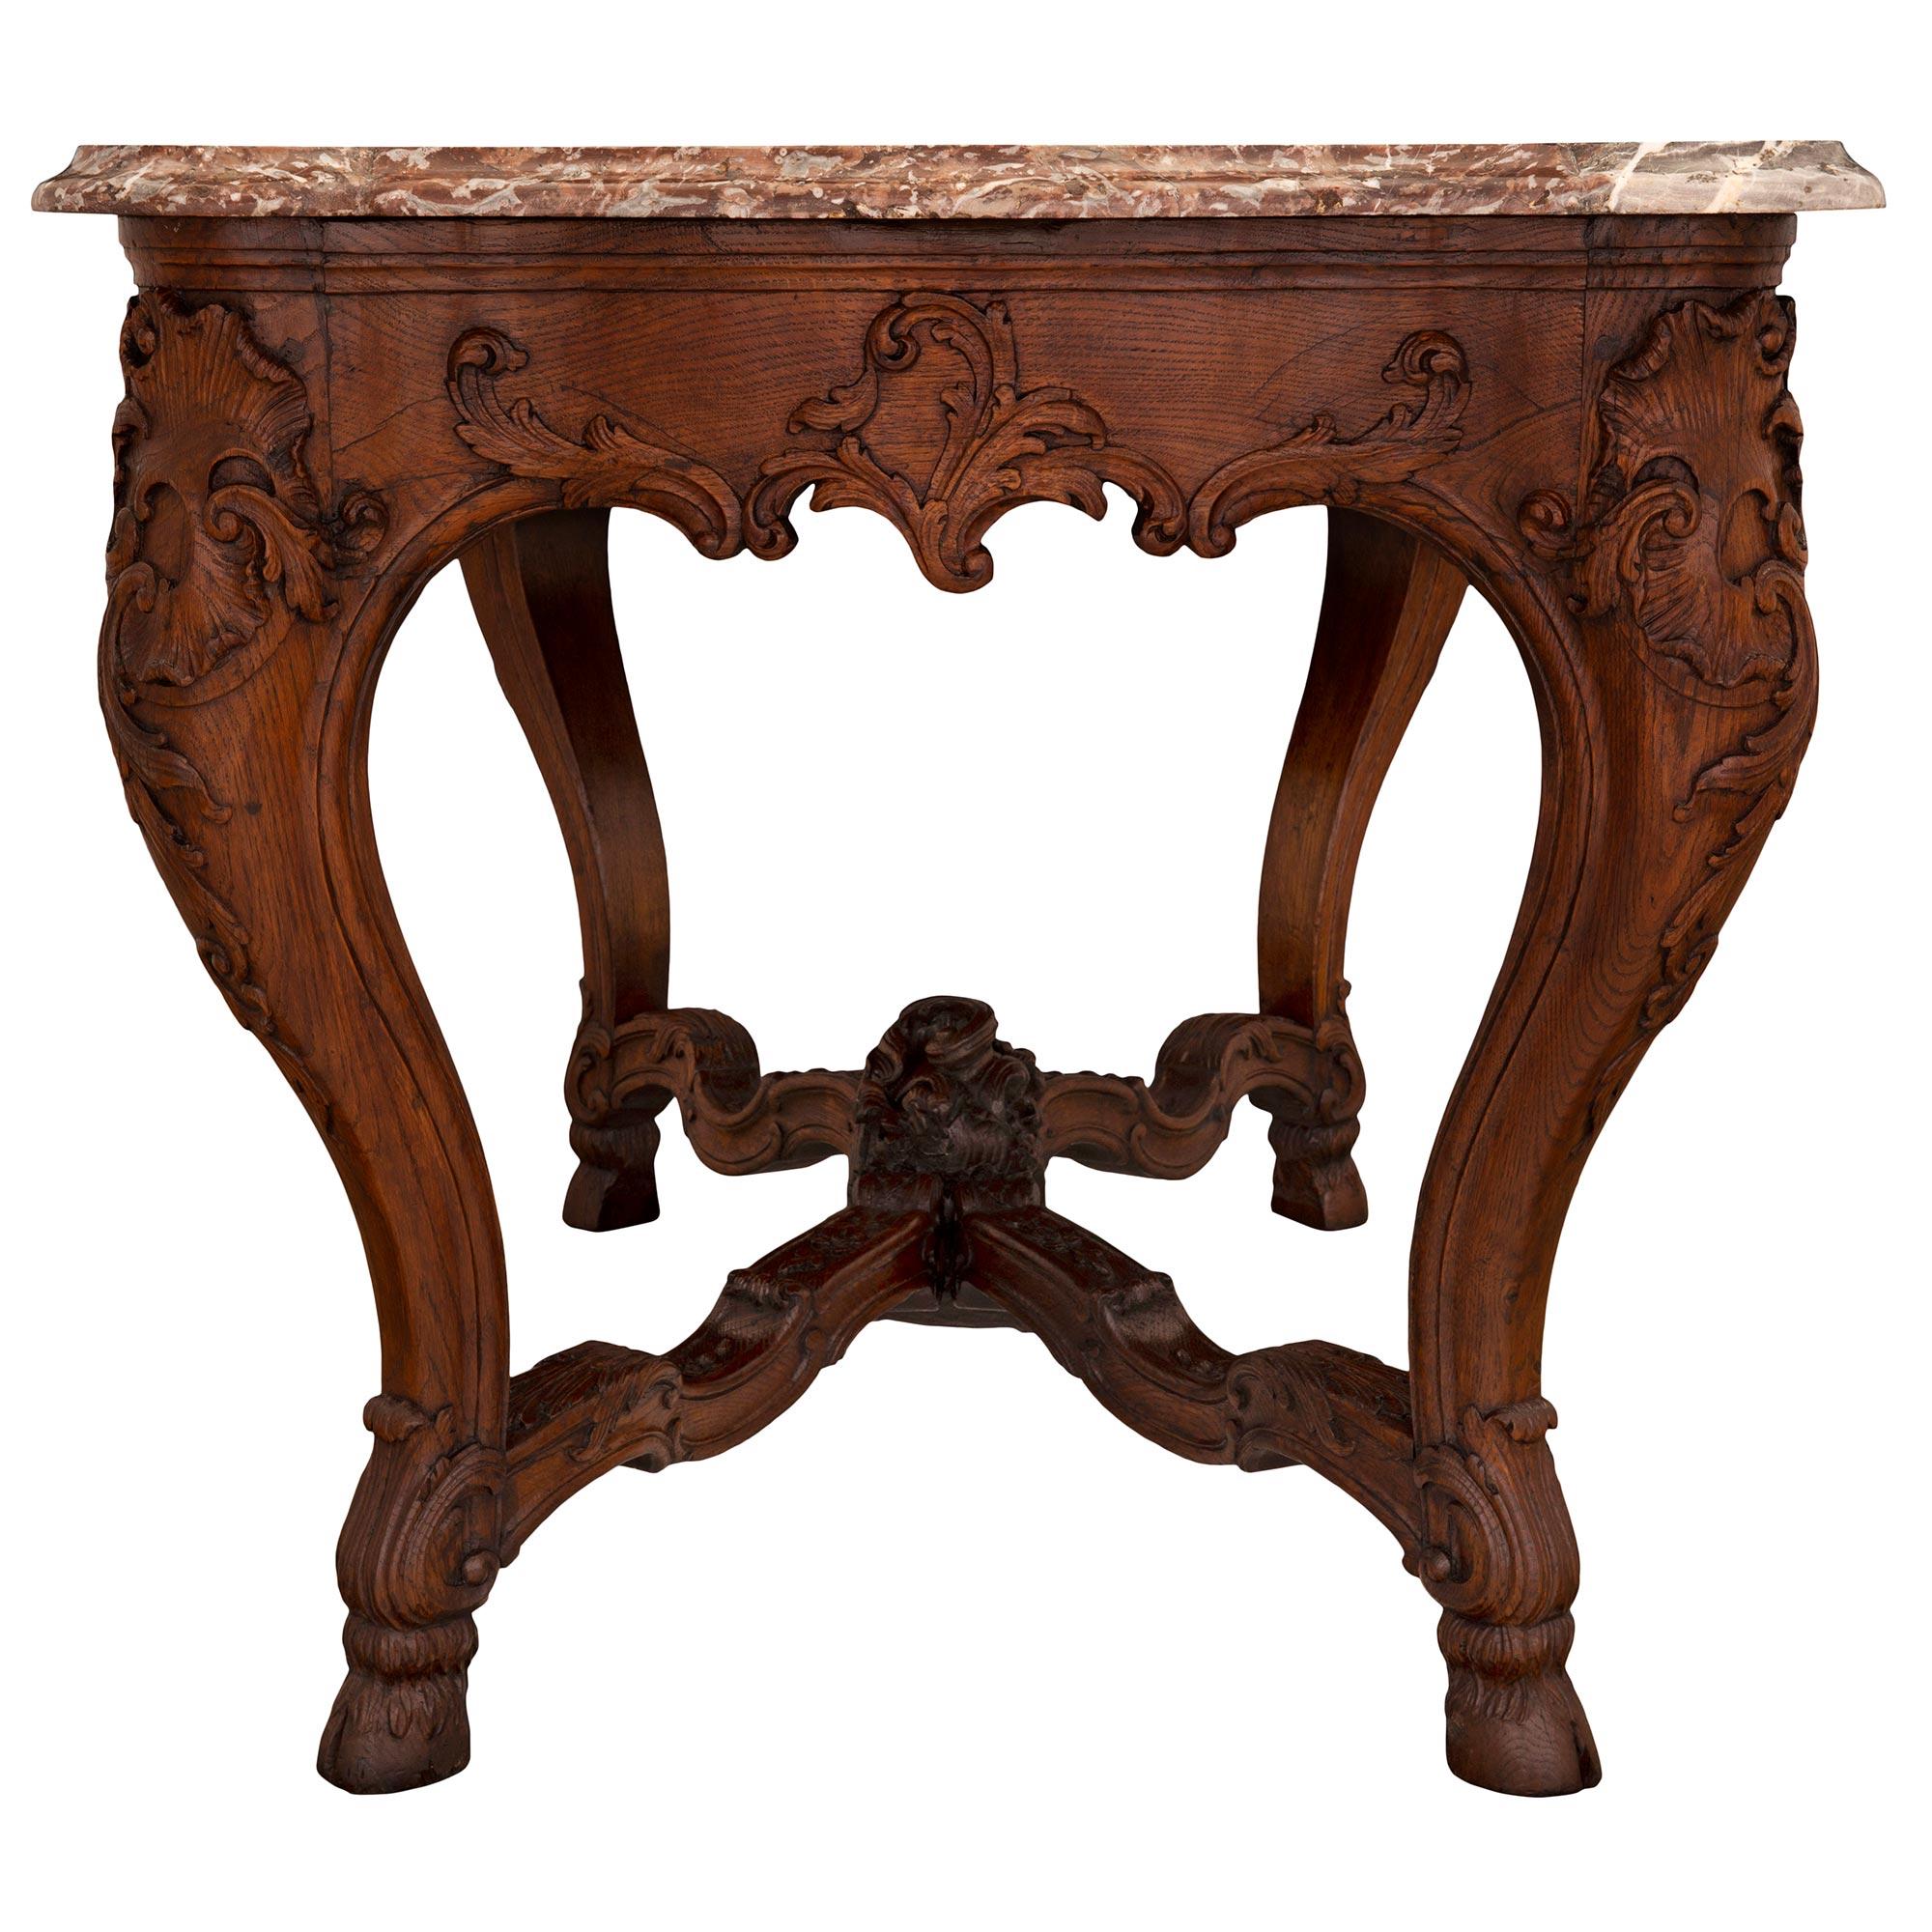 French 18th Century Régence Period Walnut And Marble Center Table In Good Condition For Sale In West Palm Beach, FL